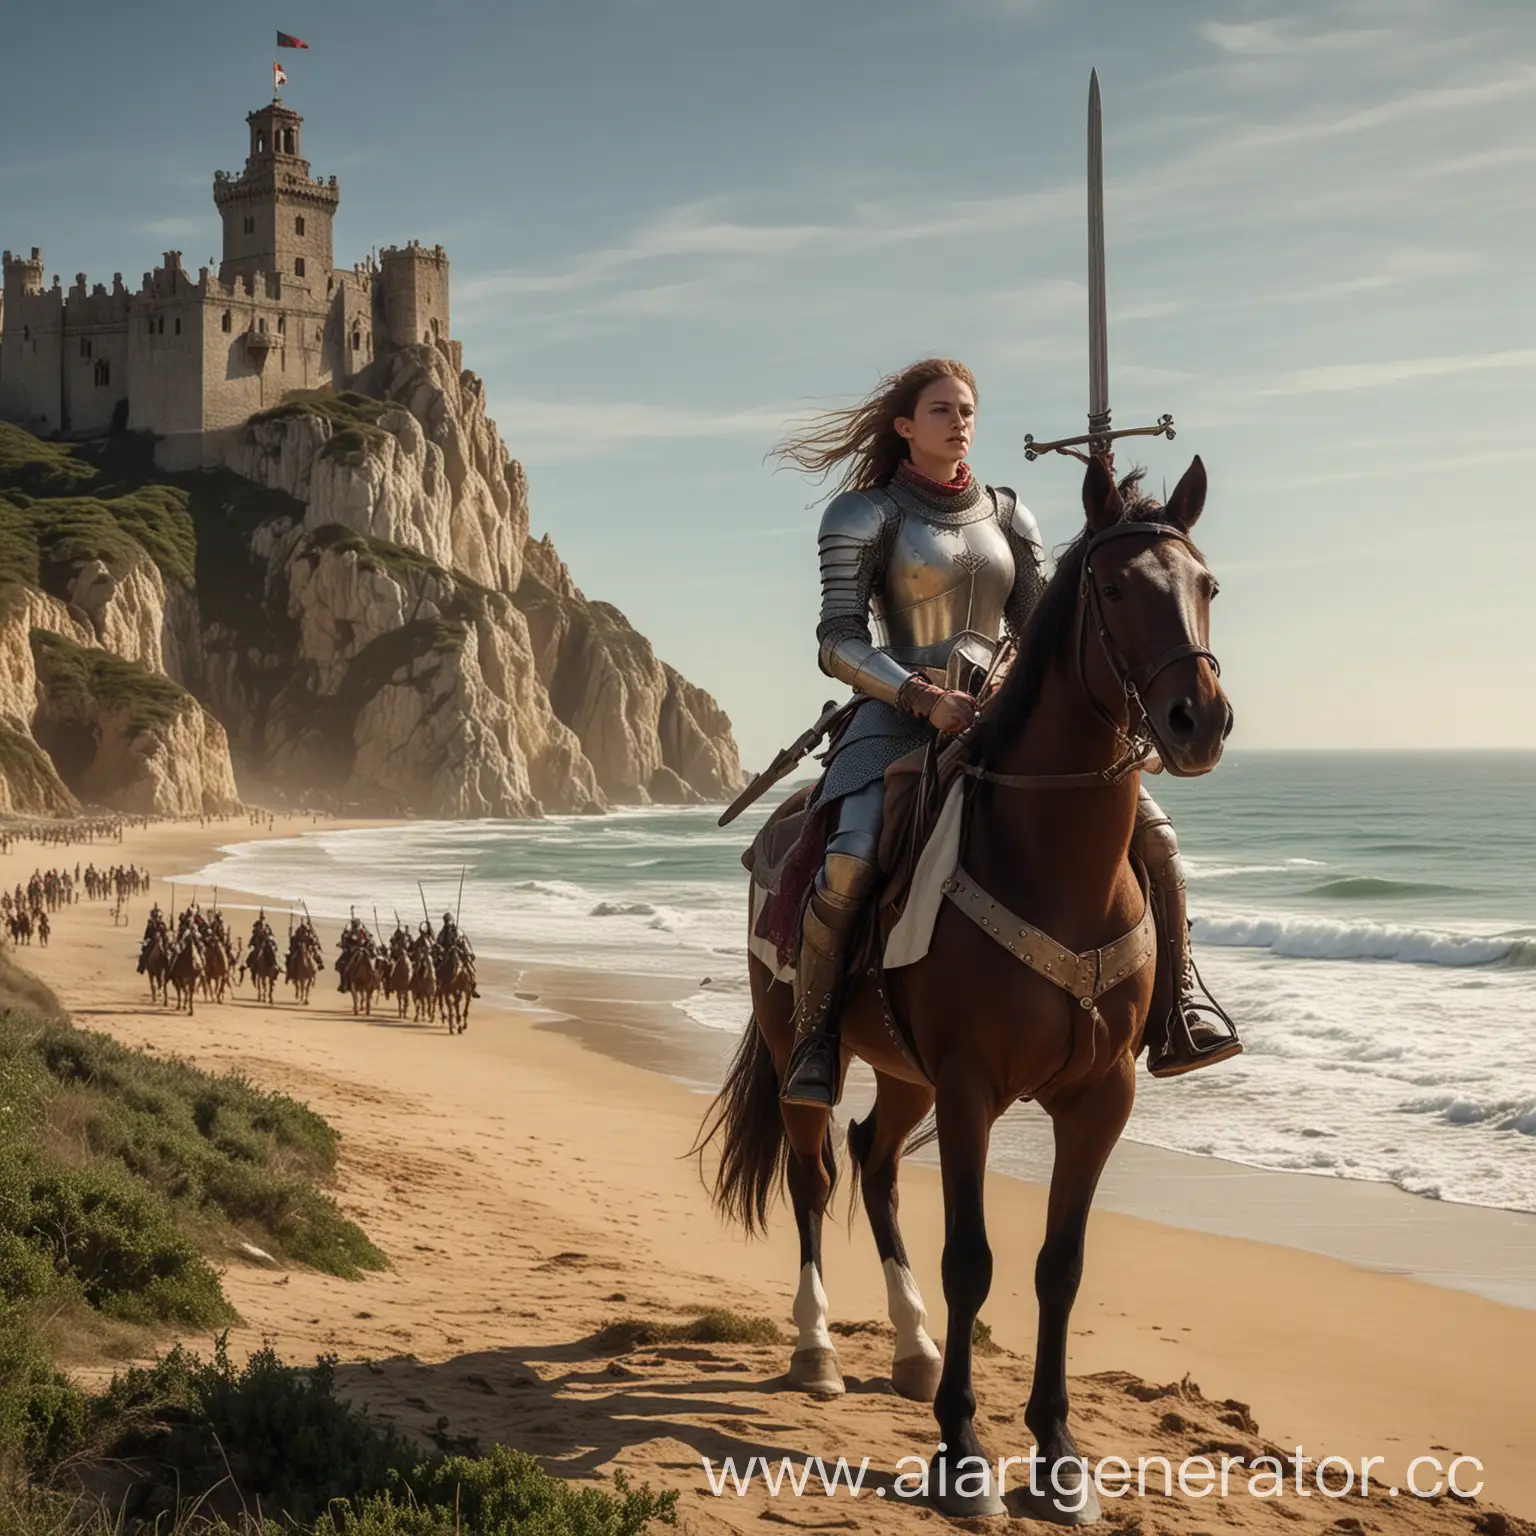 Cabo da roca nature photography, A knight girl leads troops and knights into battle on horseback with a sword over her head against the background of a beautiful castle on the seashore, DSLR, photorealistic --ar 16:9